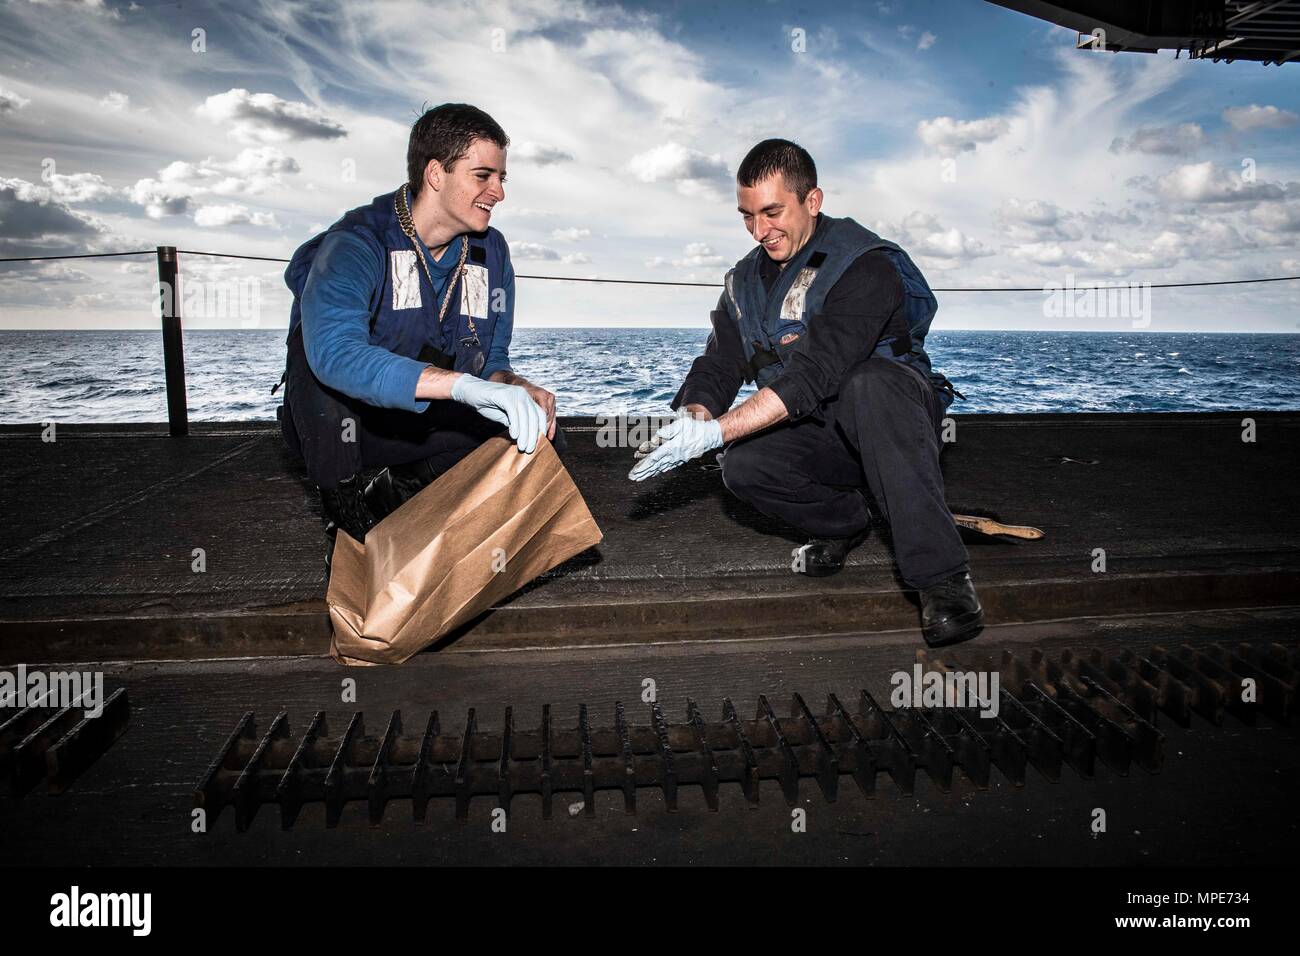 170207-N-IE397-040 ATLANTIC OCEAN  (Feb 7, 2017) Airman Devan Batie, from Salt Lake City, left, and Airman Chris Dukette, from Chicopee, Mass., remove debris from a deck drain in the hangar bay of the aircraft carrier USS Dwight D. Eisenhower (CVN 69). The ship is conducting aircraft carrier qualifications during the sustainment phase of the Optimized Fleet Response Plan (OFRP). (U.S. Navy photo by Mass Communication Specialist 3rd Class Christopher A. Michaels/Released) Stock Photo